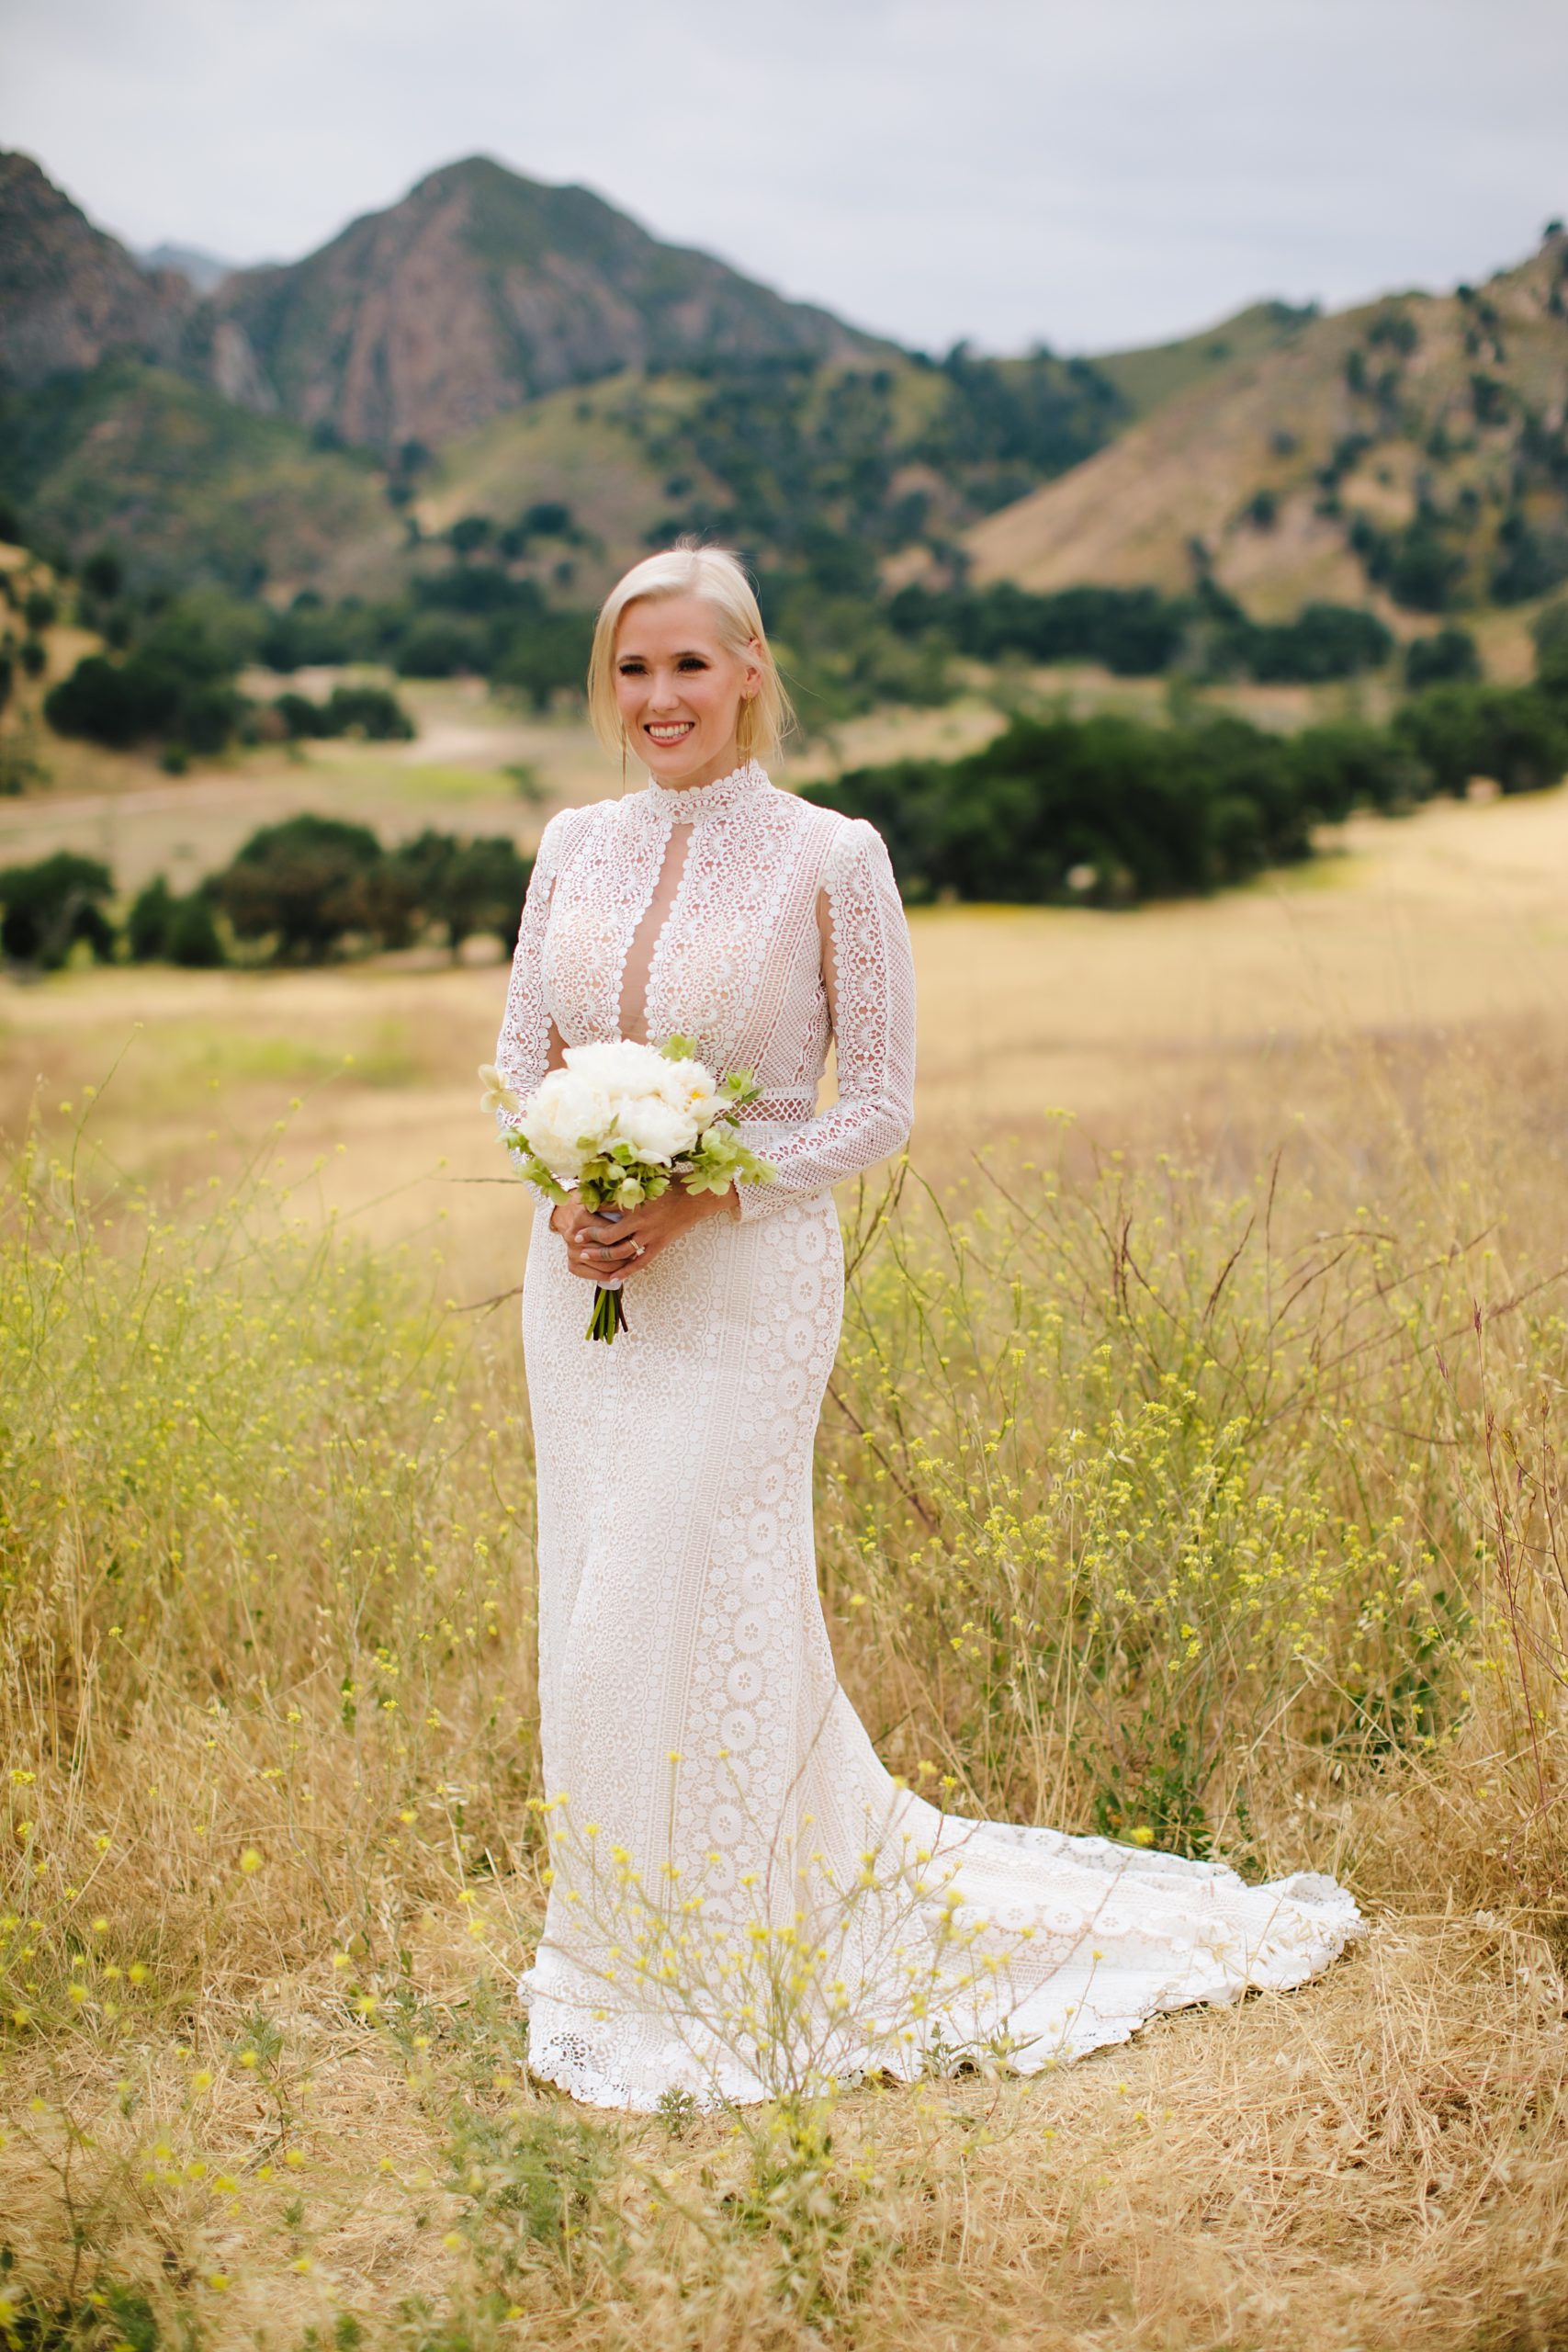 Molly-and-Brian_0021 Simple and Intimate Meadow Wedding with Family in Malibu, CA